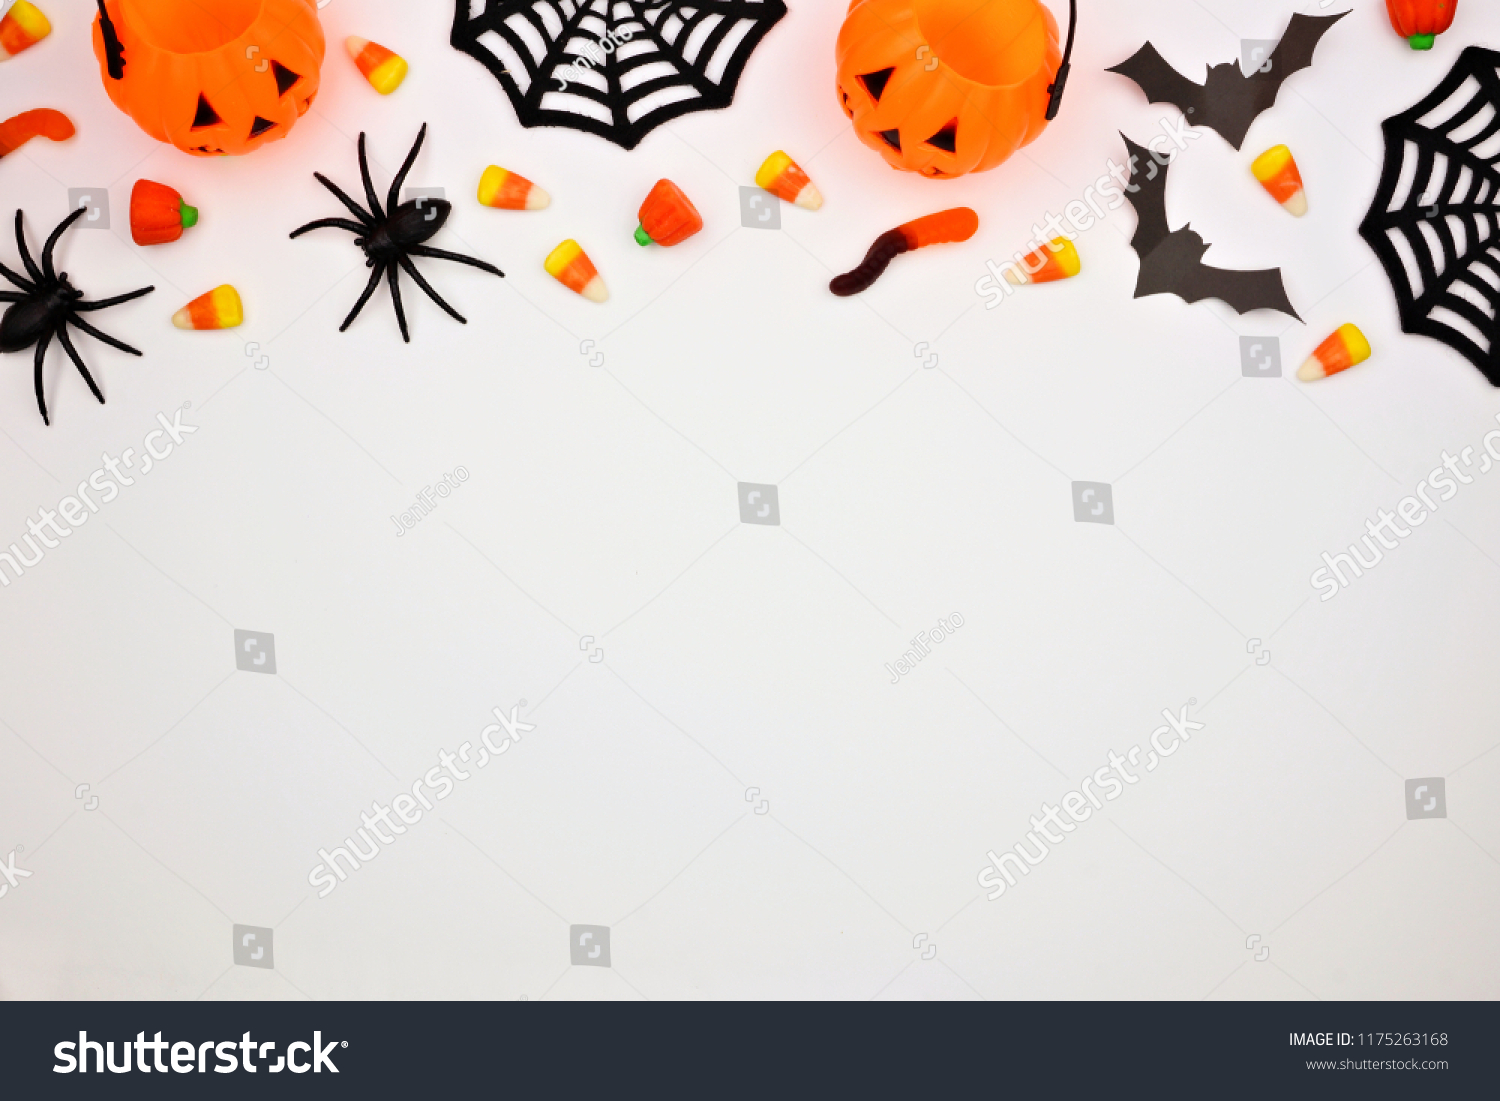 Halloween top border of scattered candy and decor. Flat lay over a white background. Copy space. #1175263168